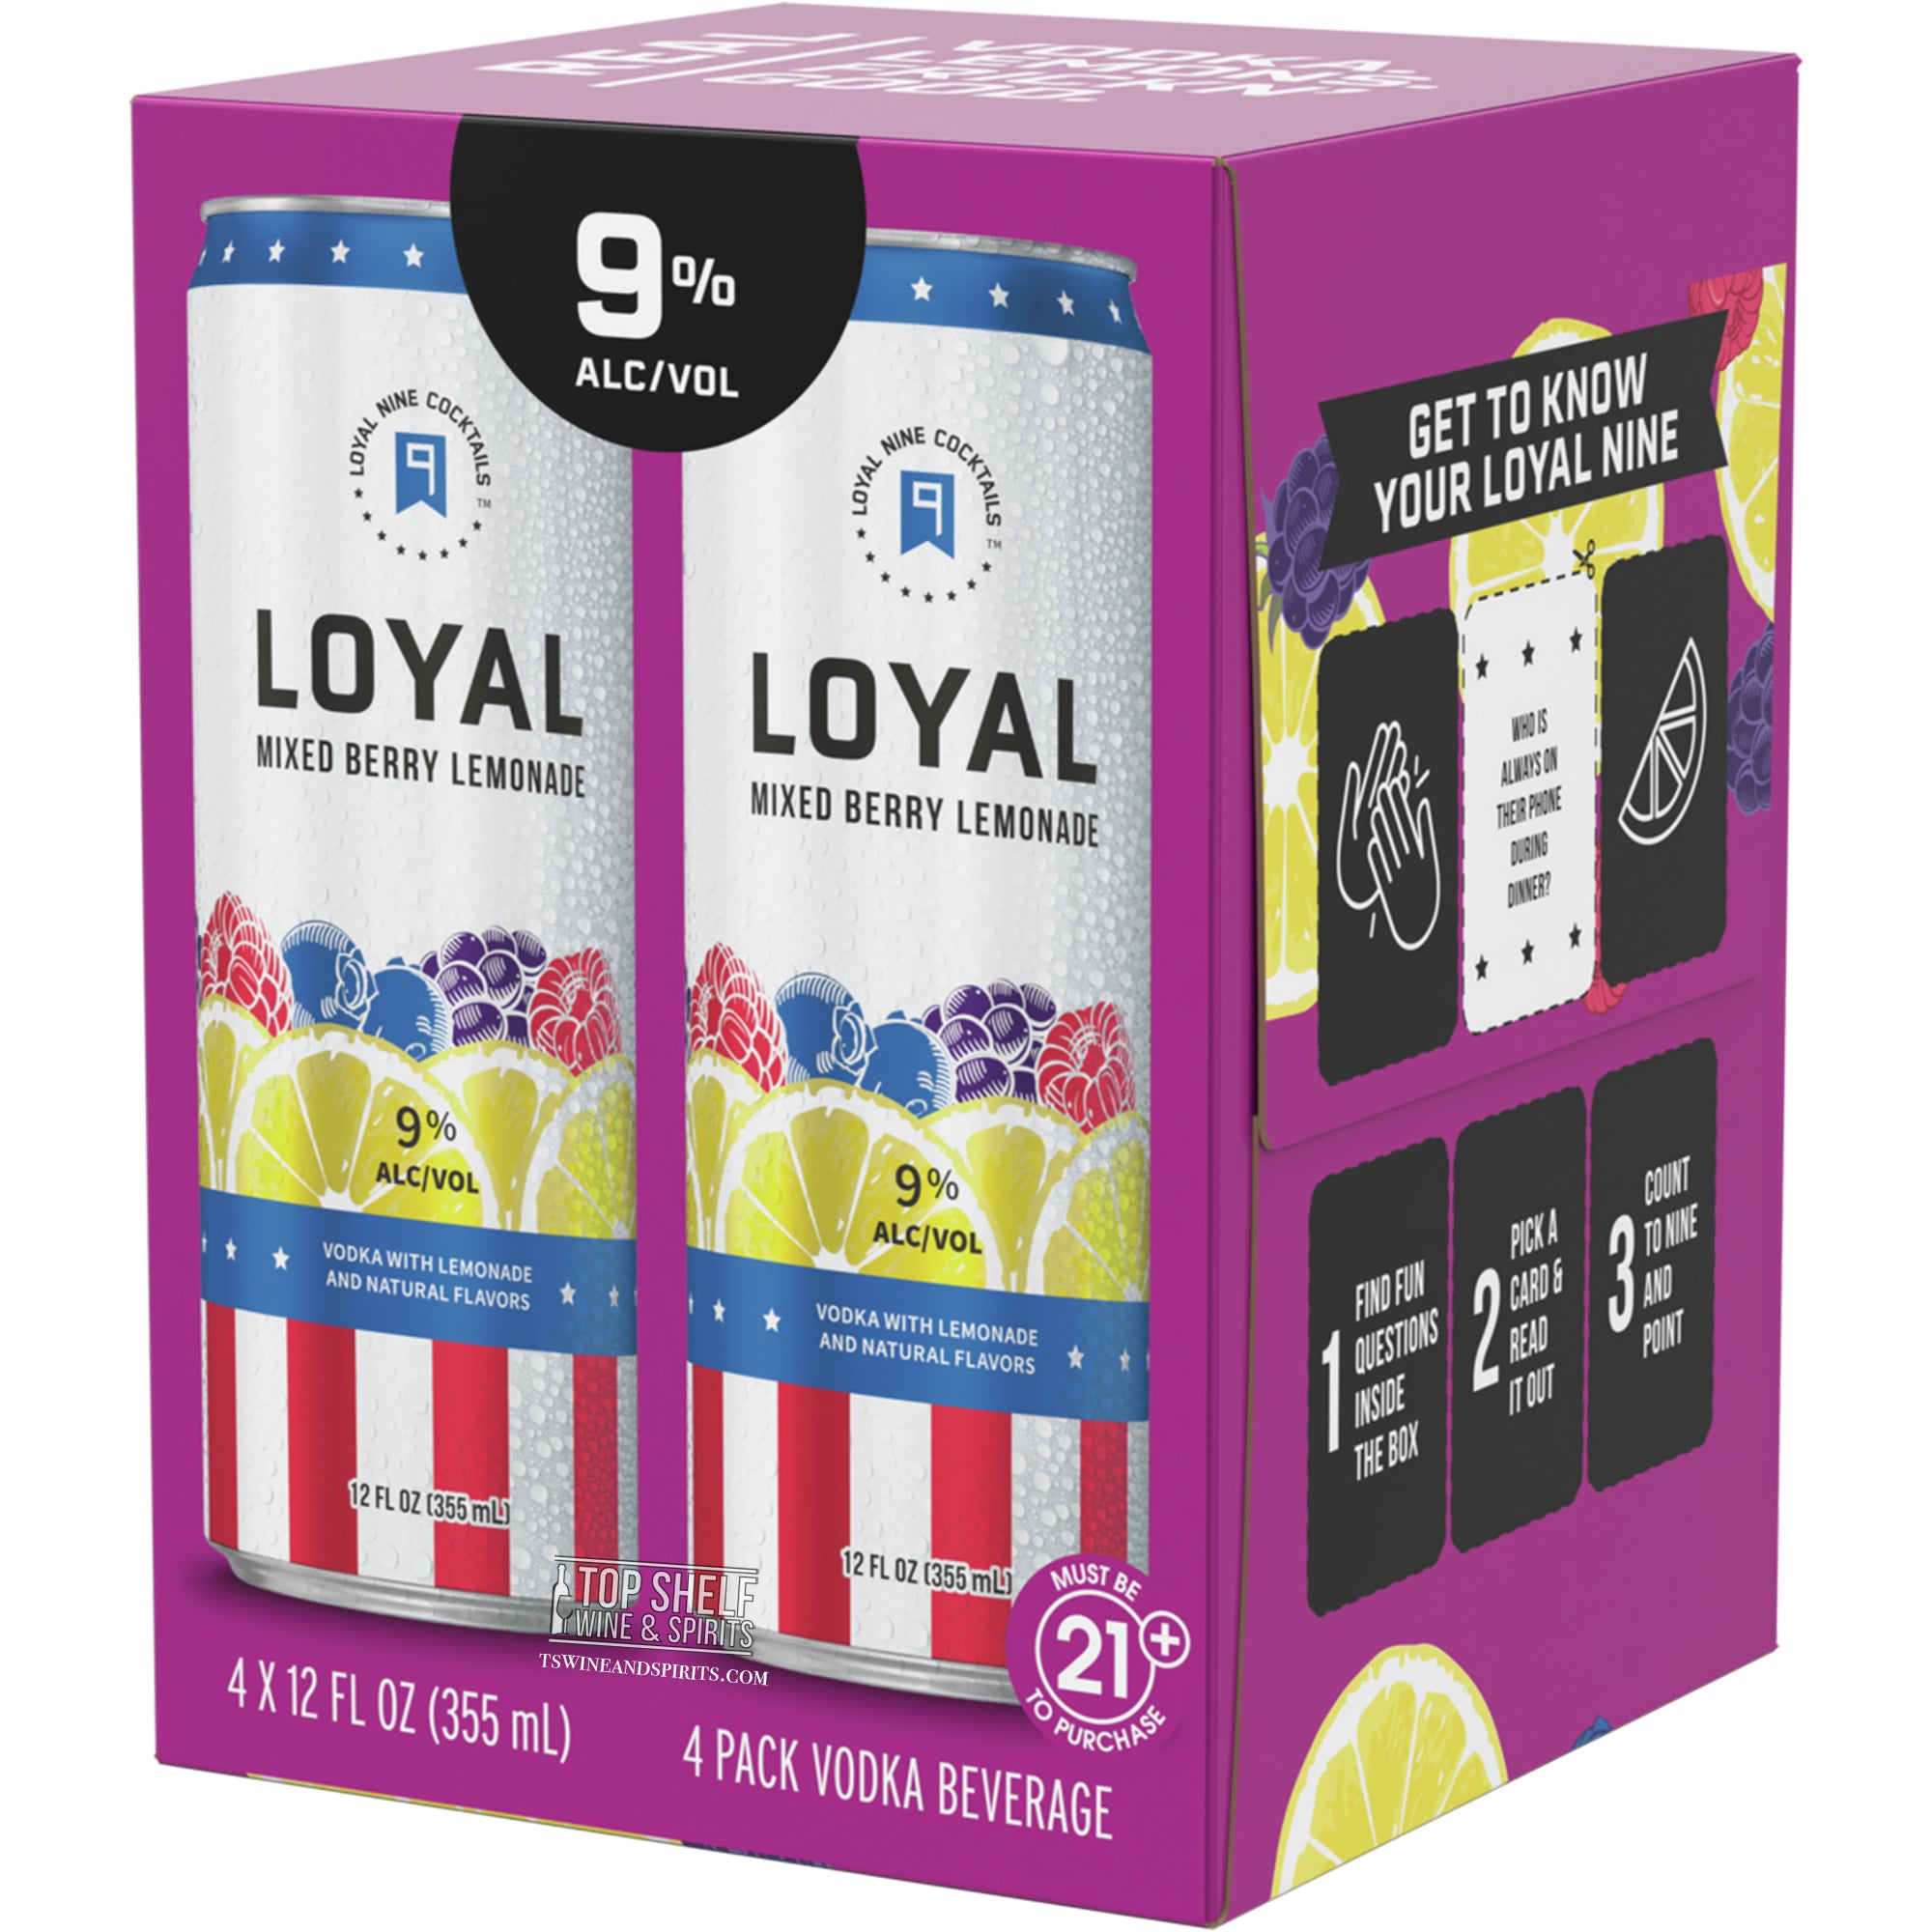 Loyal 9 Mixed Berry Lemonade Cocktail 4 Pack Cans